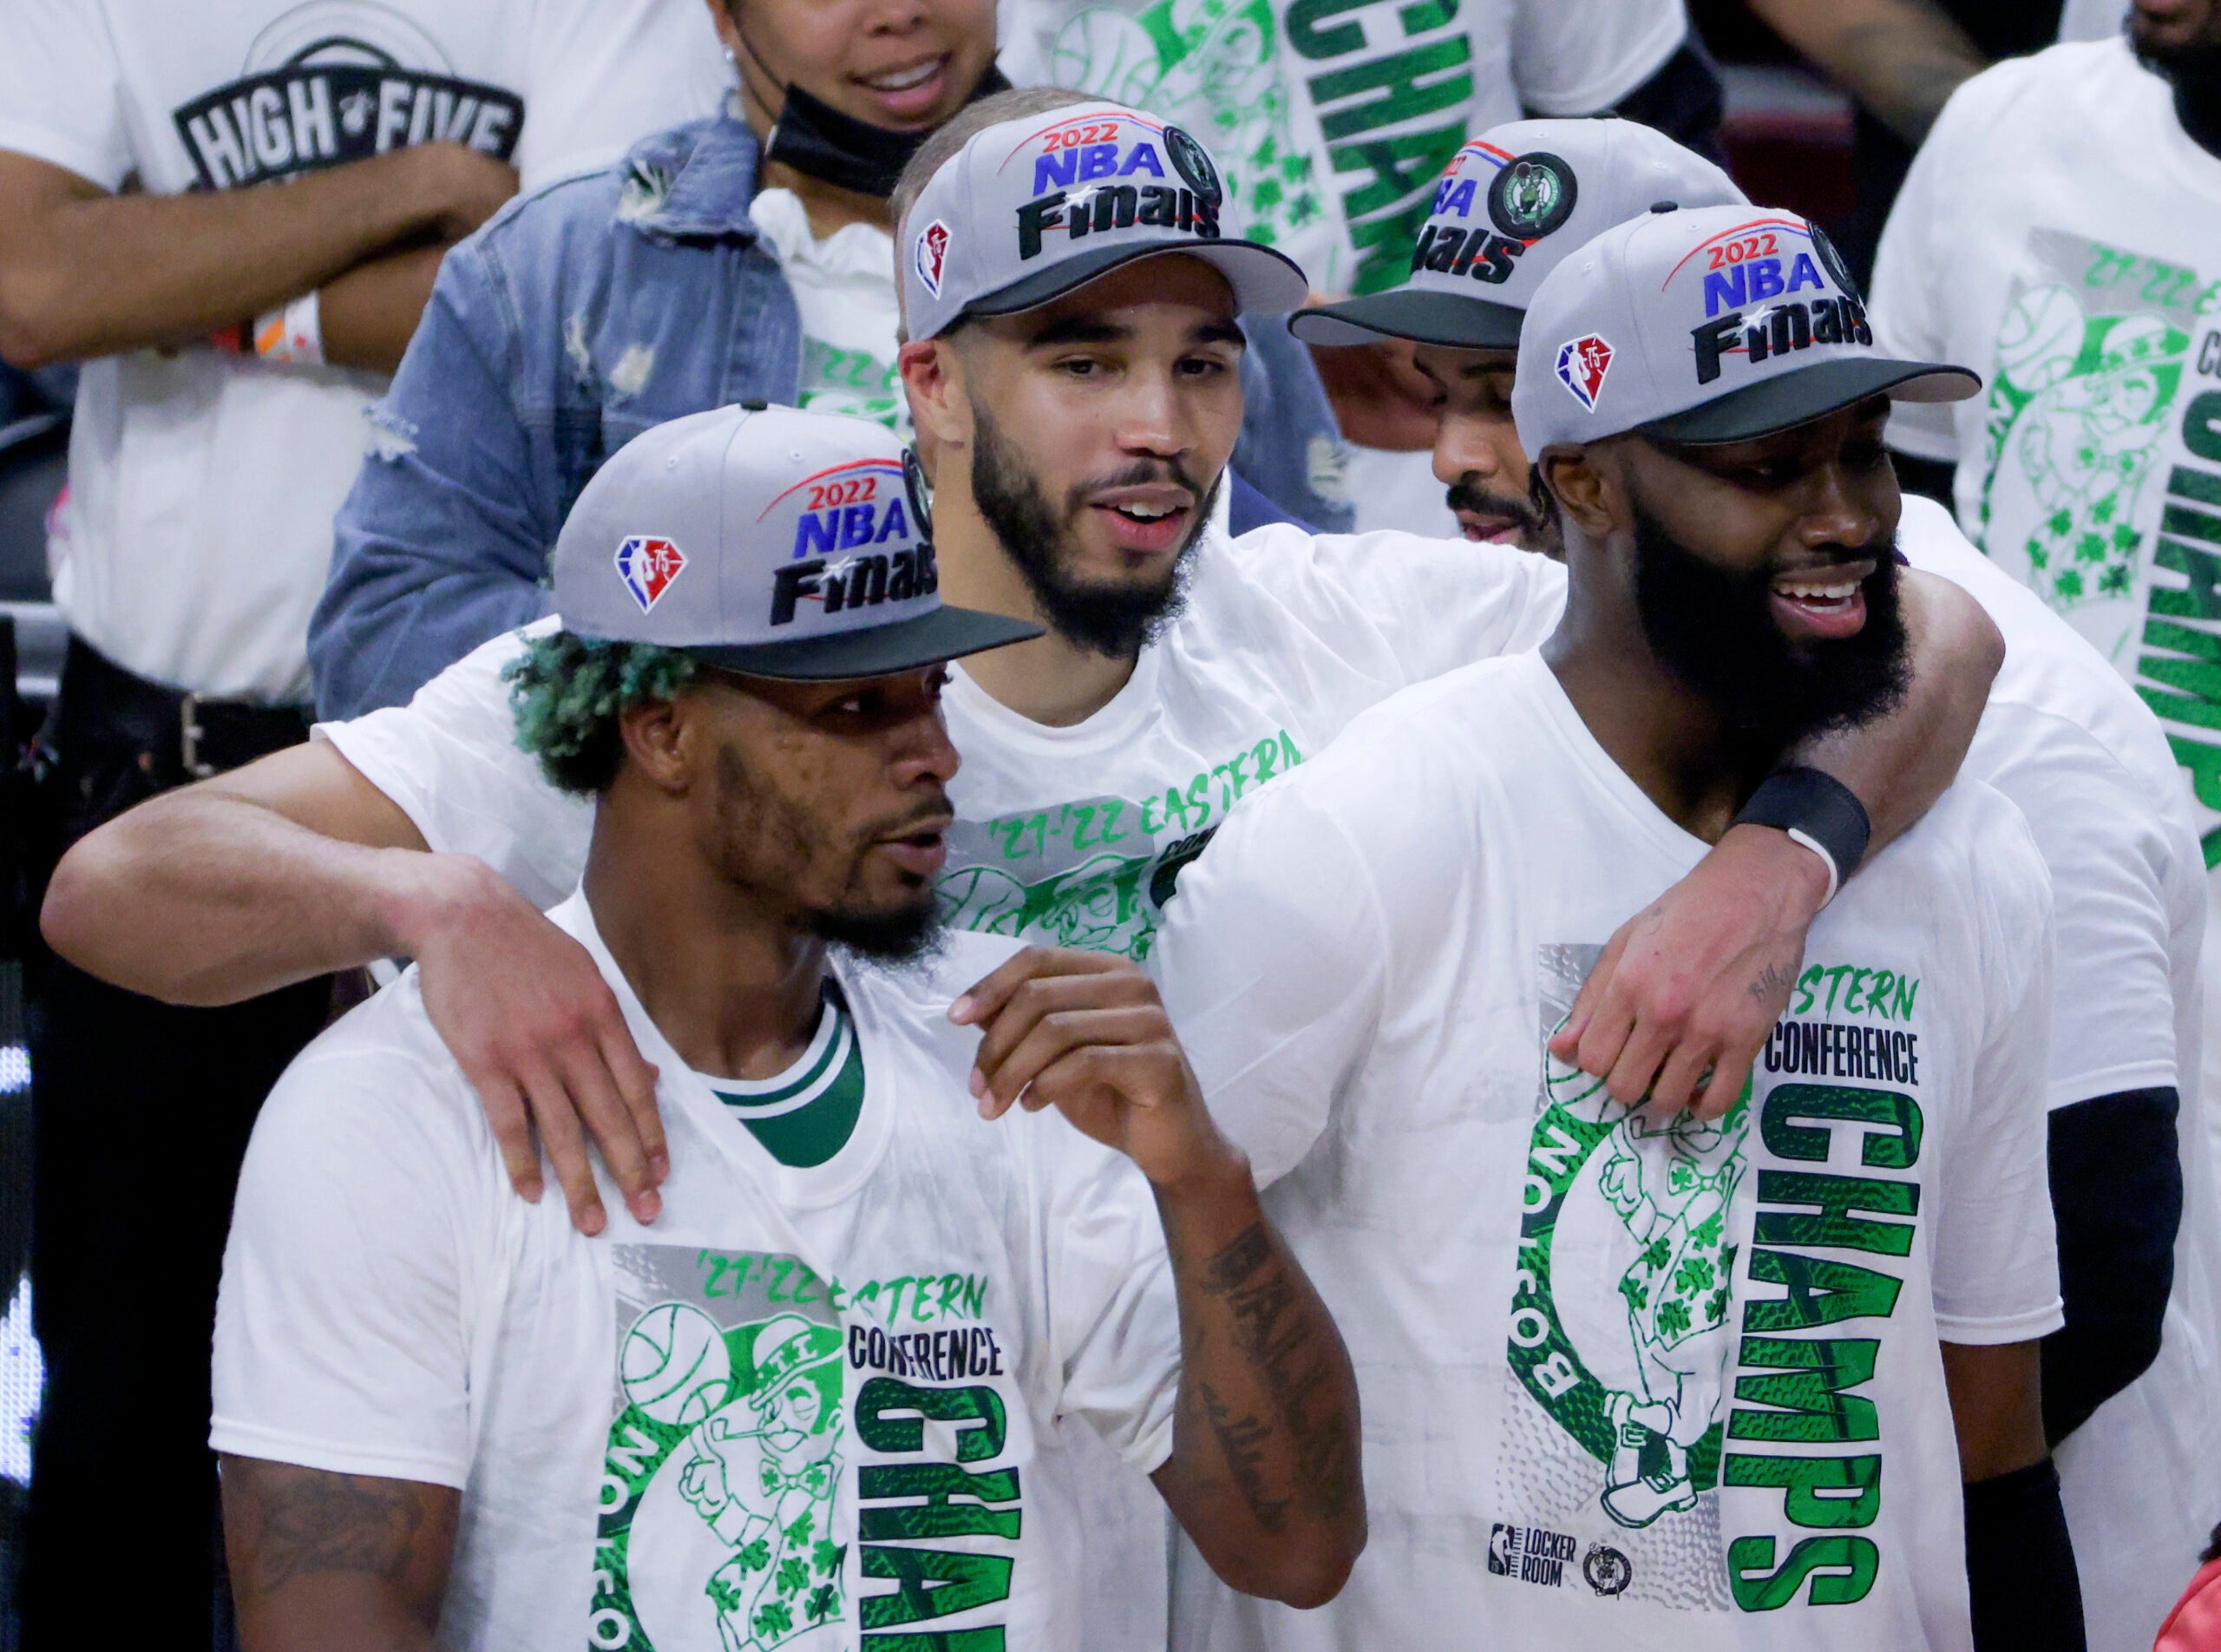 Boston Celtics Marcus Smart, Jayson Tatum, and Jaylen Brown (7) after they defeated the Miami Heat 100-96 winning game 7 of the NBA Eastern Conference Finals at FTX Arena.